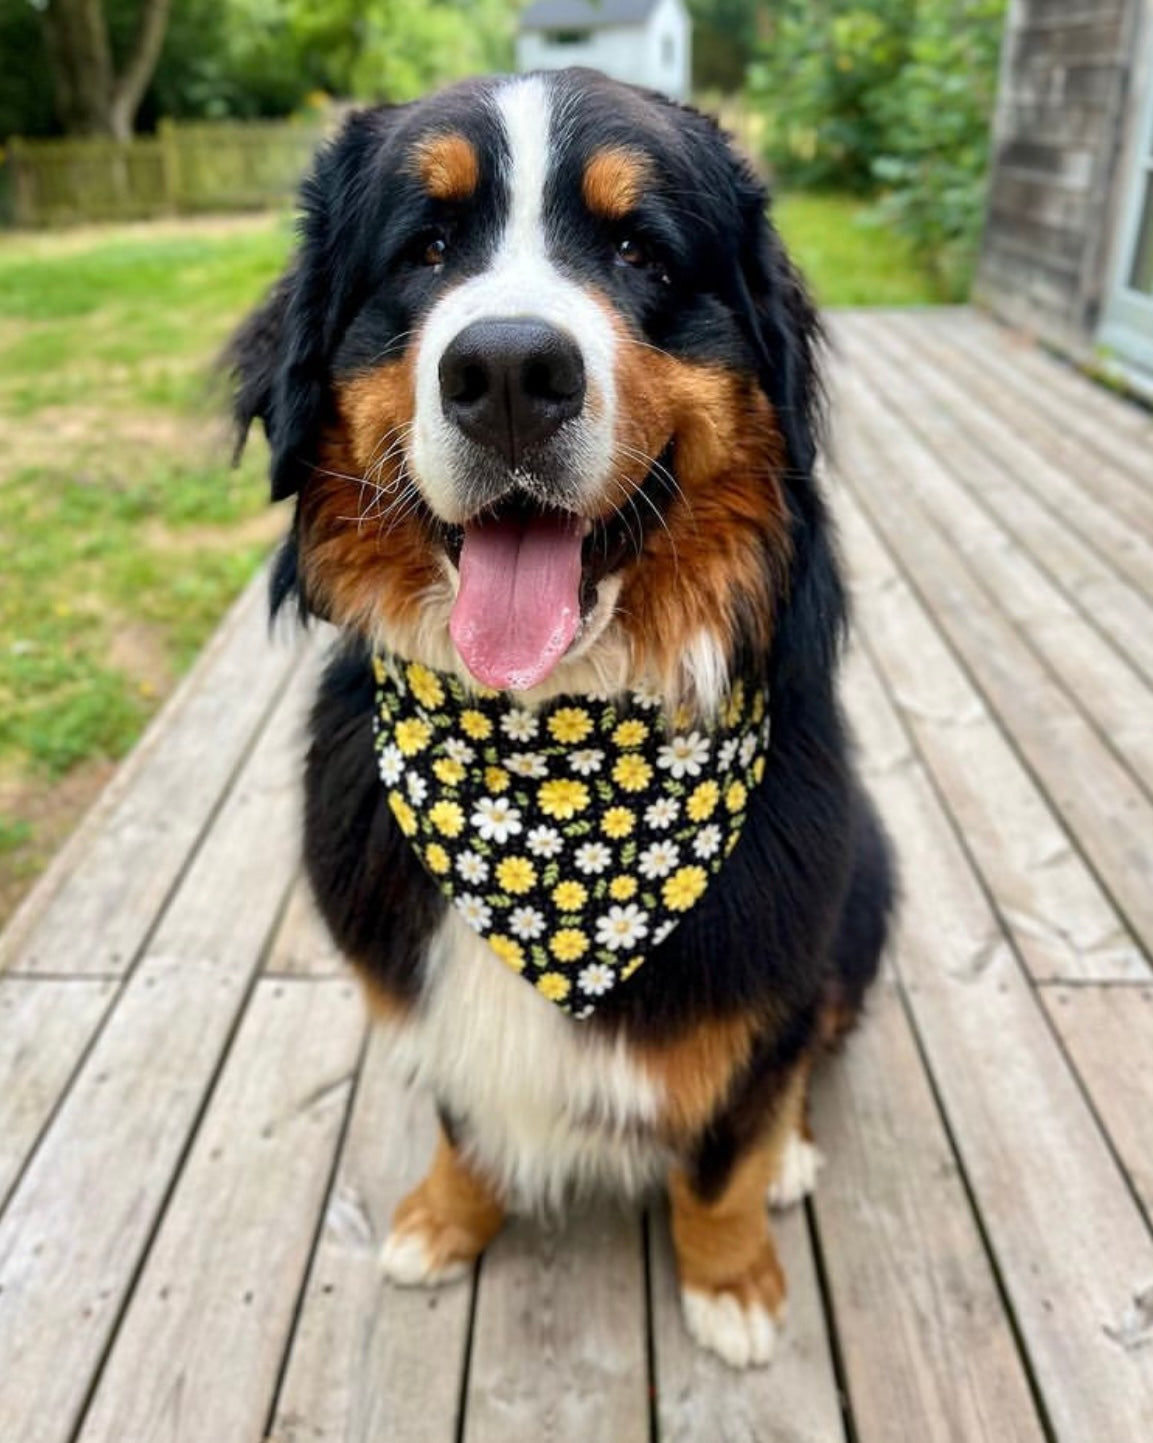 Sweet As Can Bee Plaid & Floral Reversible Dog Bandanas